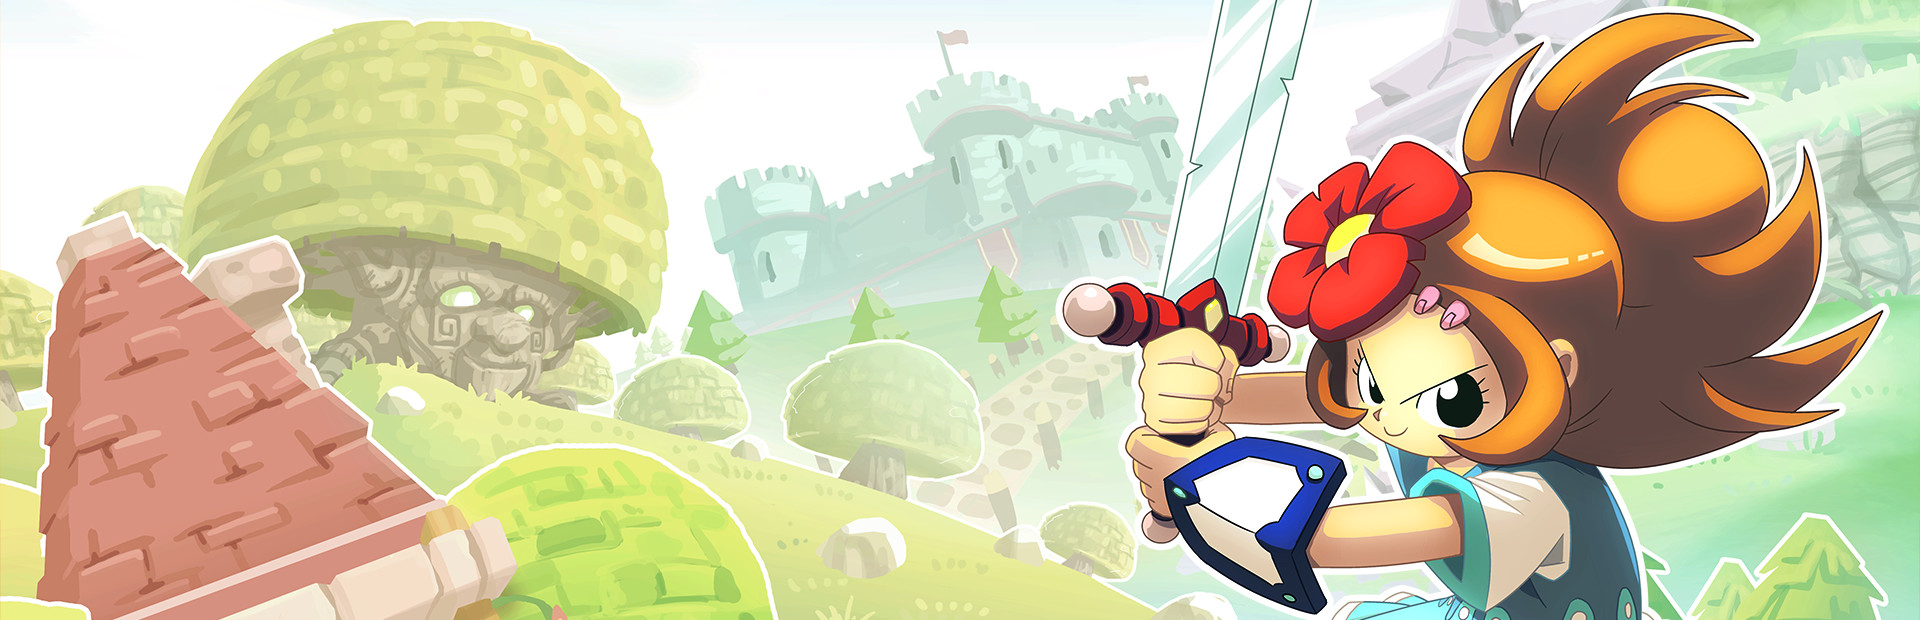 Blossom Tales: The Sleeping King cover image